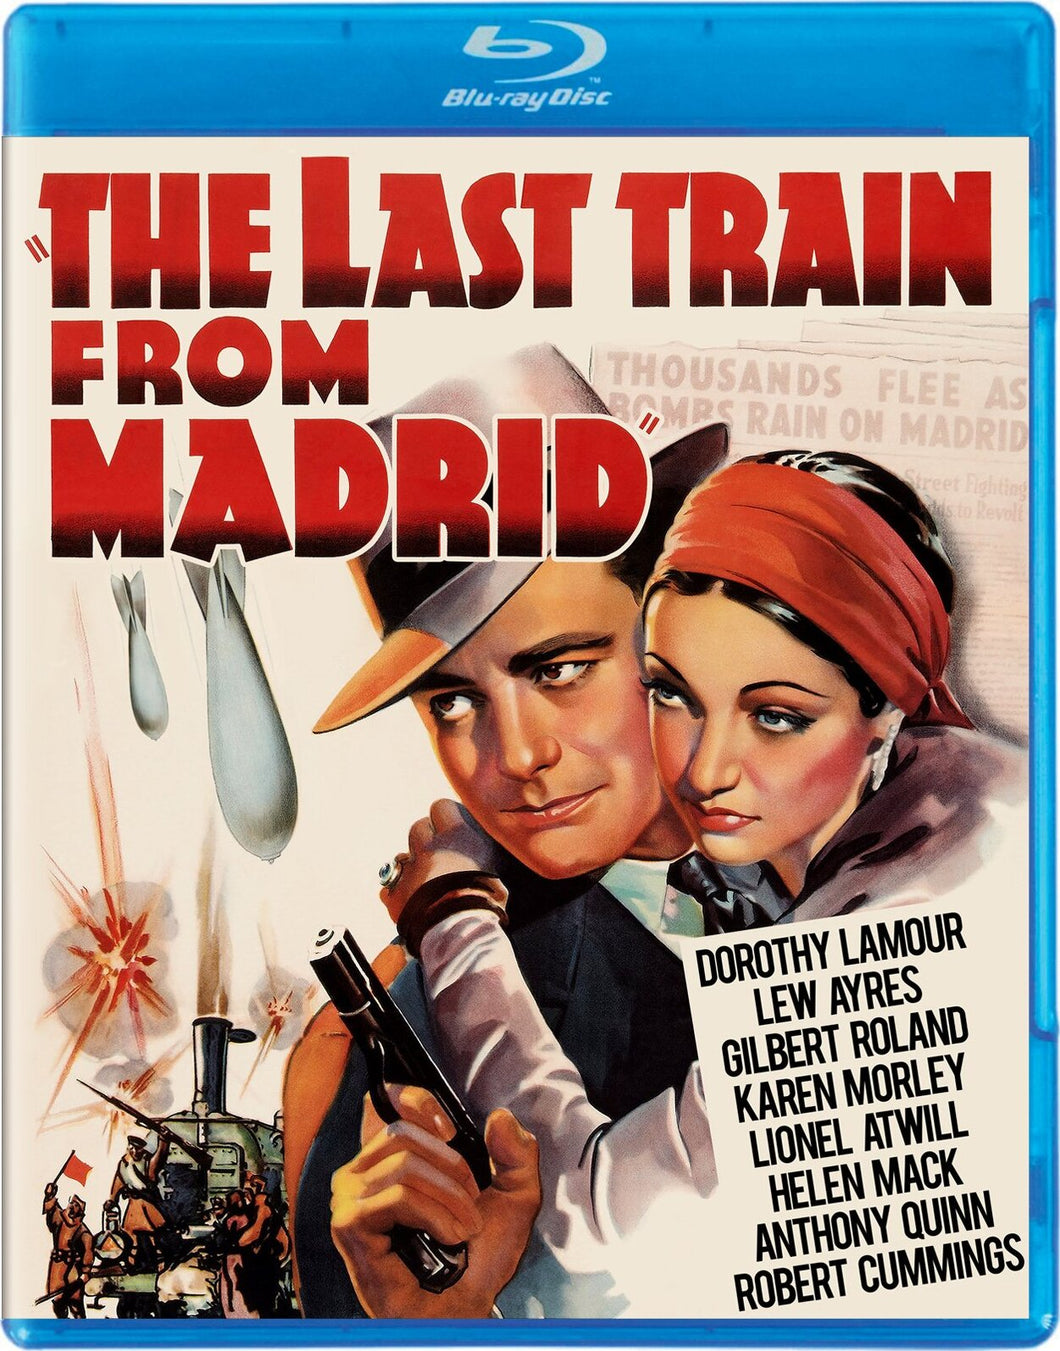 The Last Train from Madrid (1937) de James P. Hogan - front cover